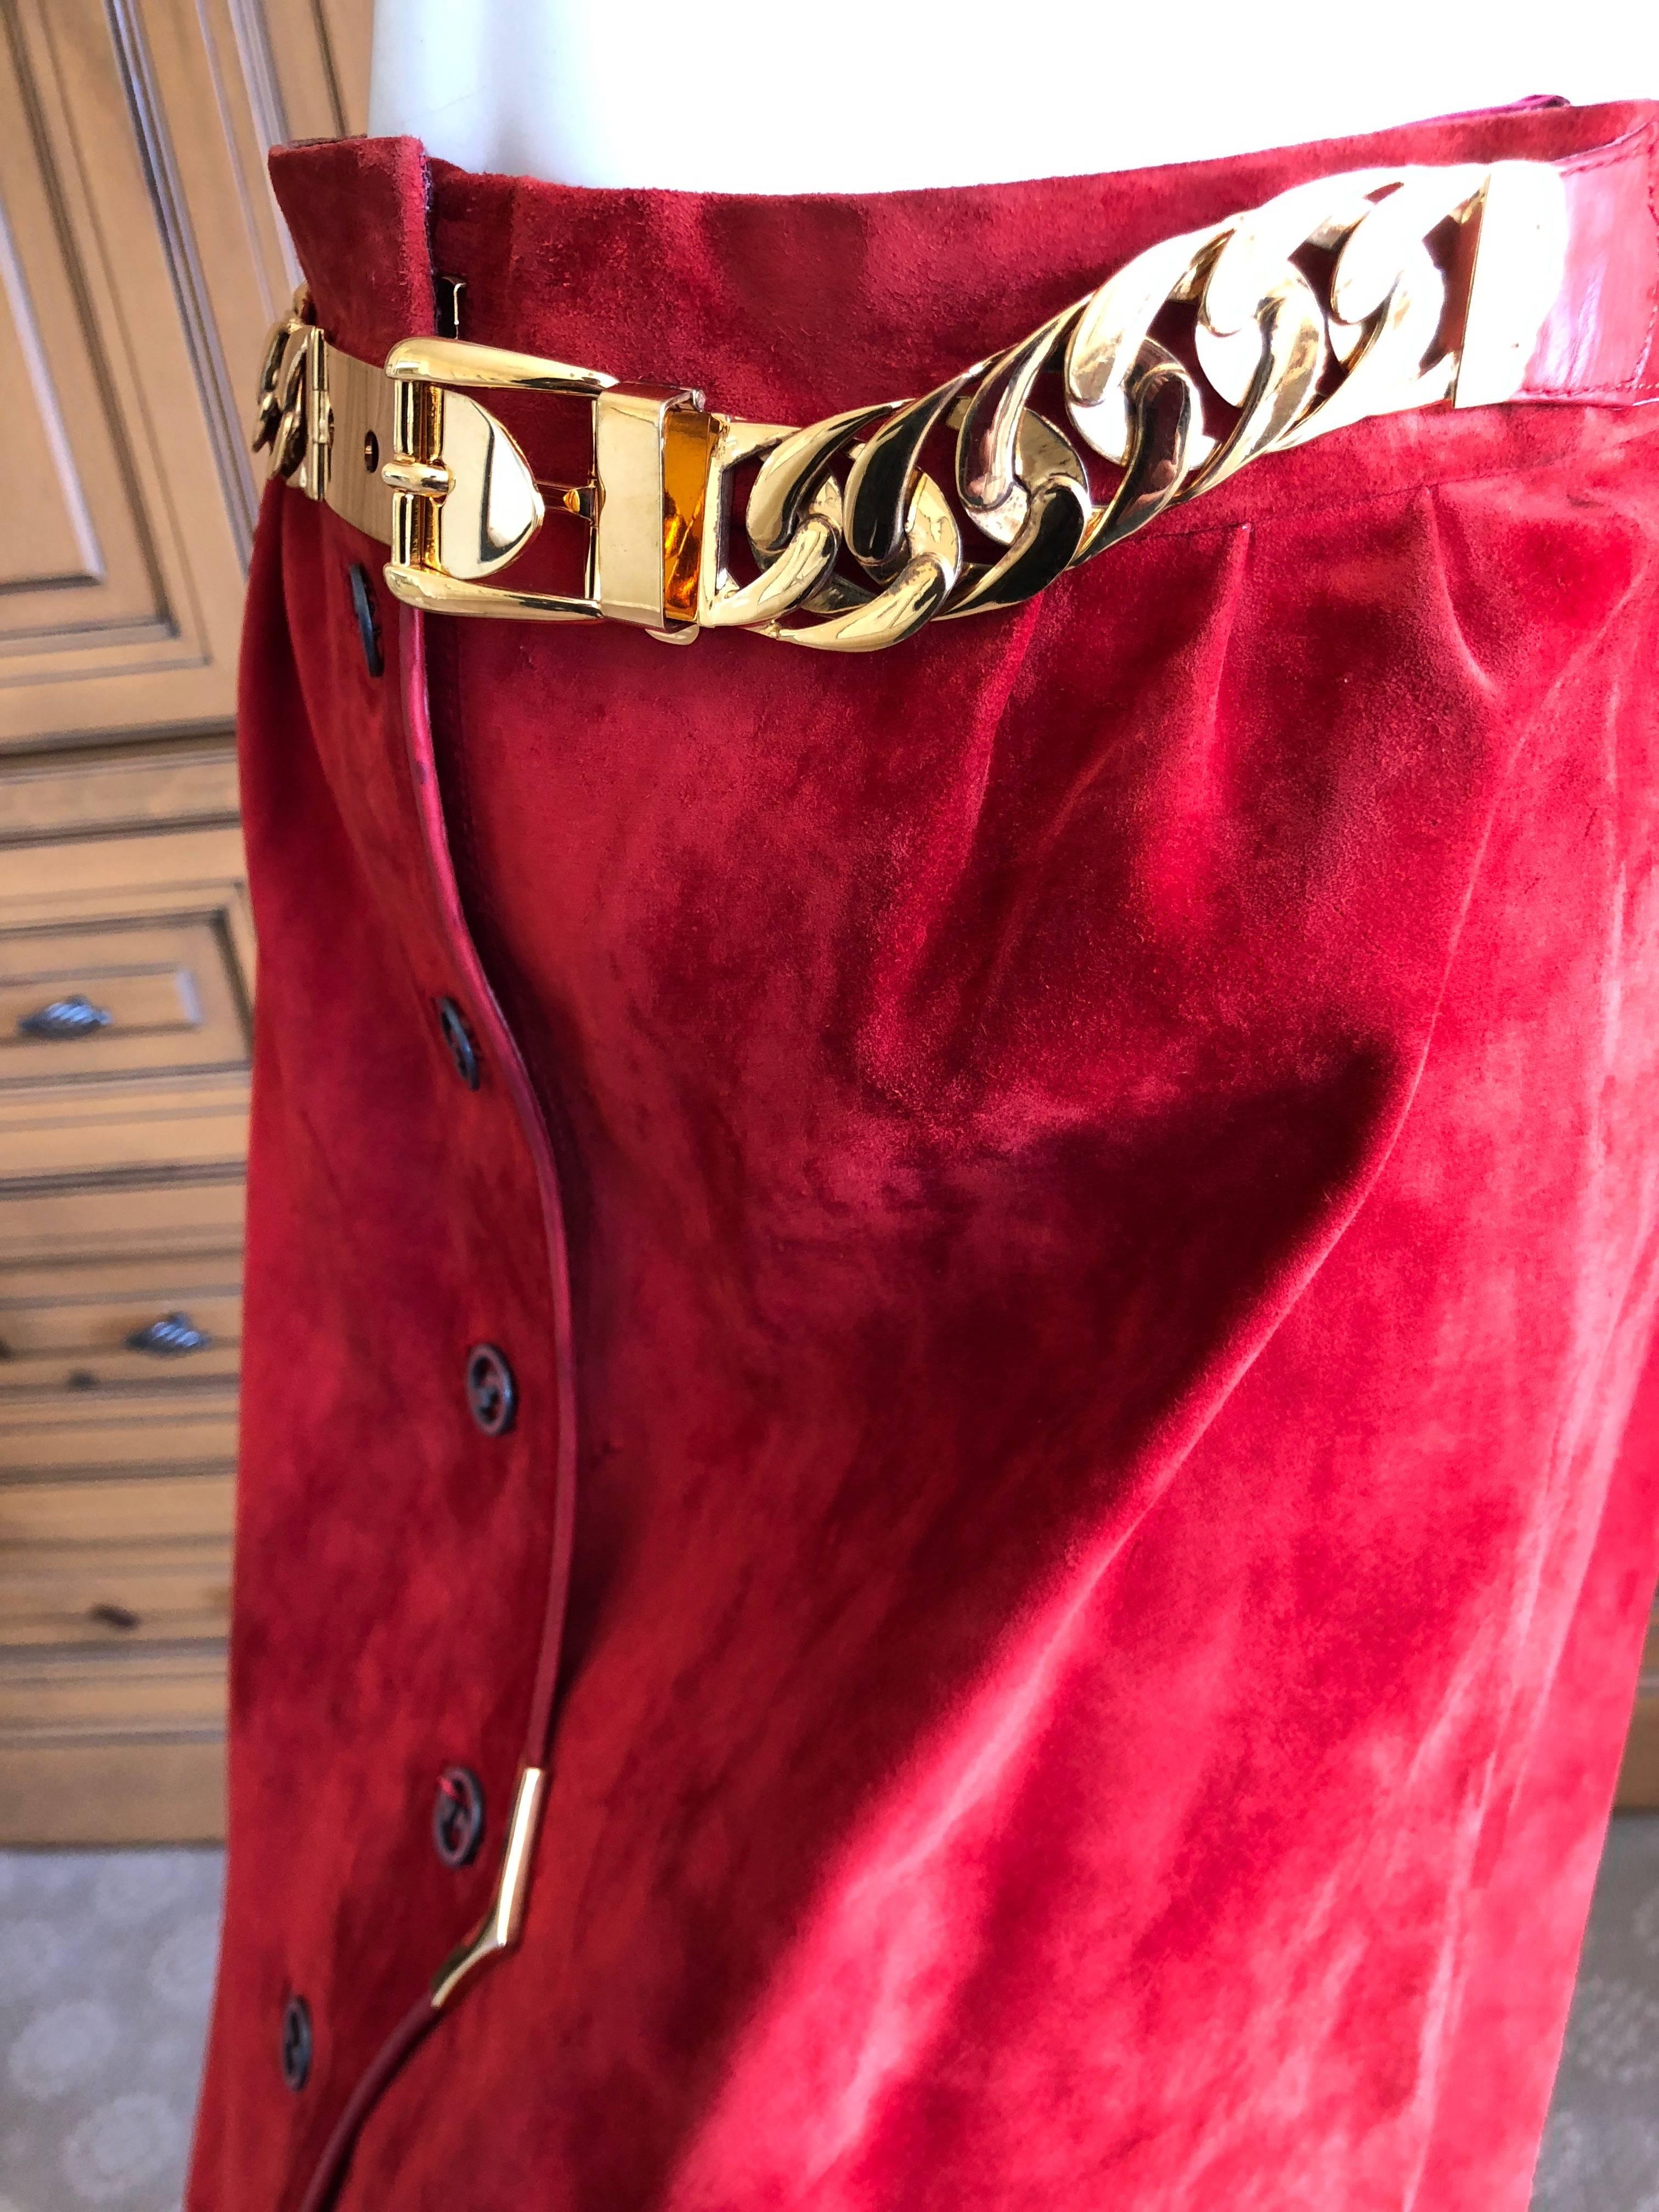  Gucci 1970's Red Leather Trim Suede Skirt with Chain Details and Big GG Buttons For Sale 2